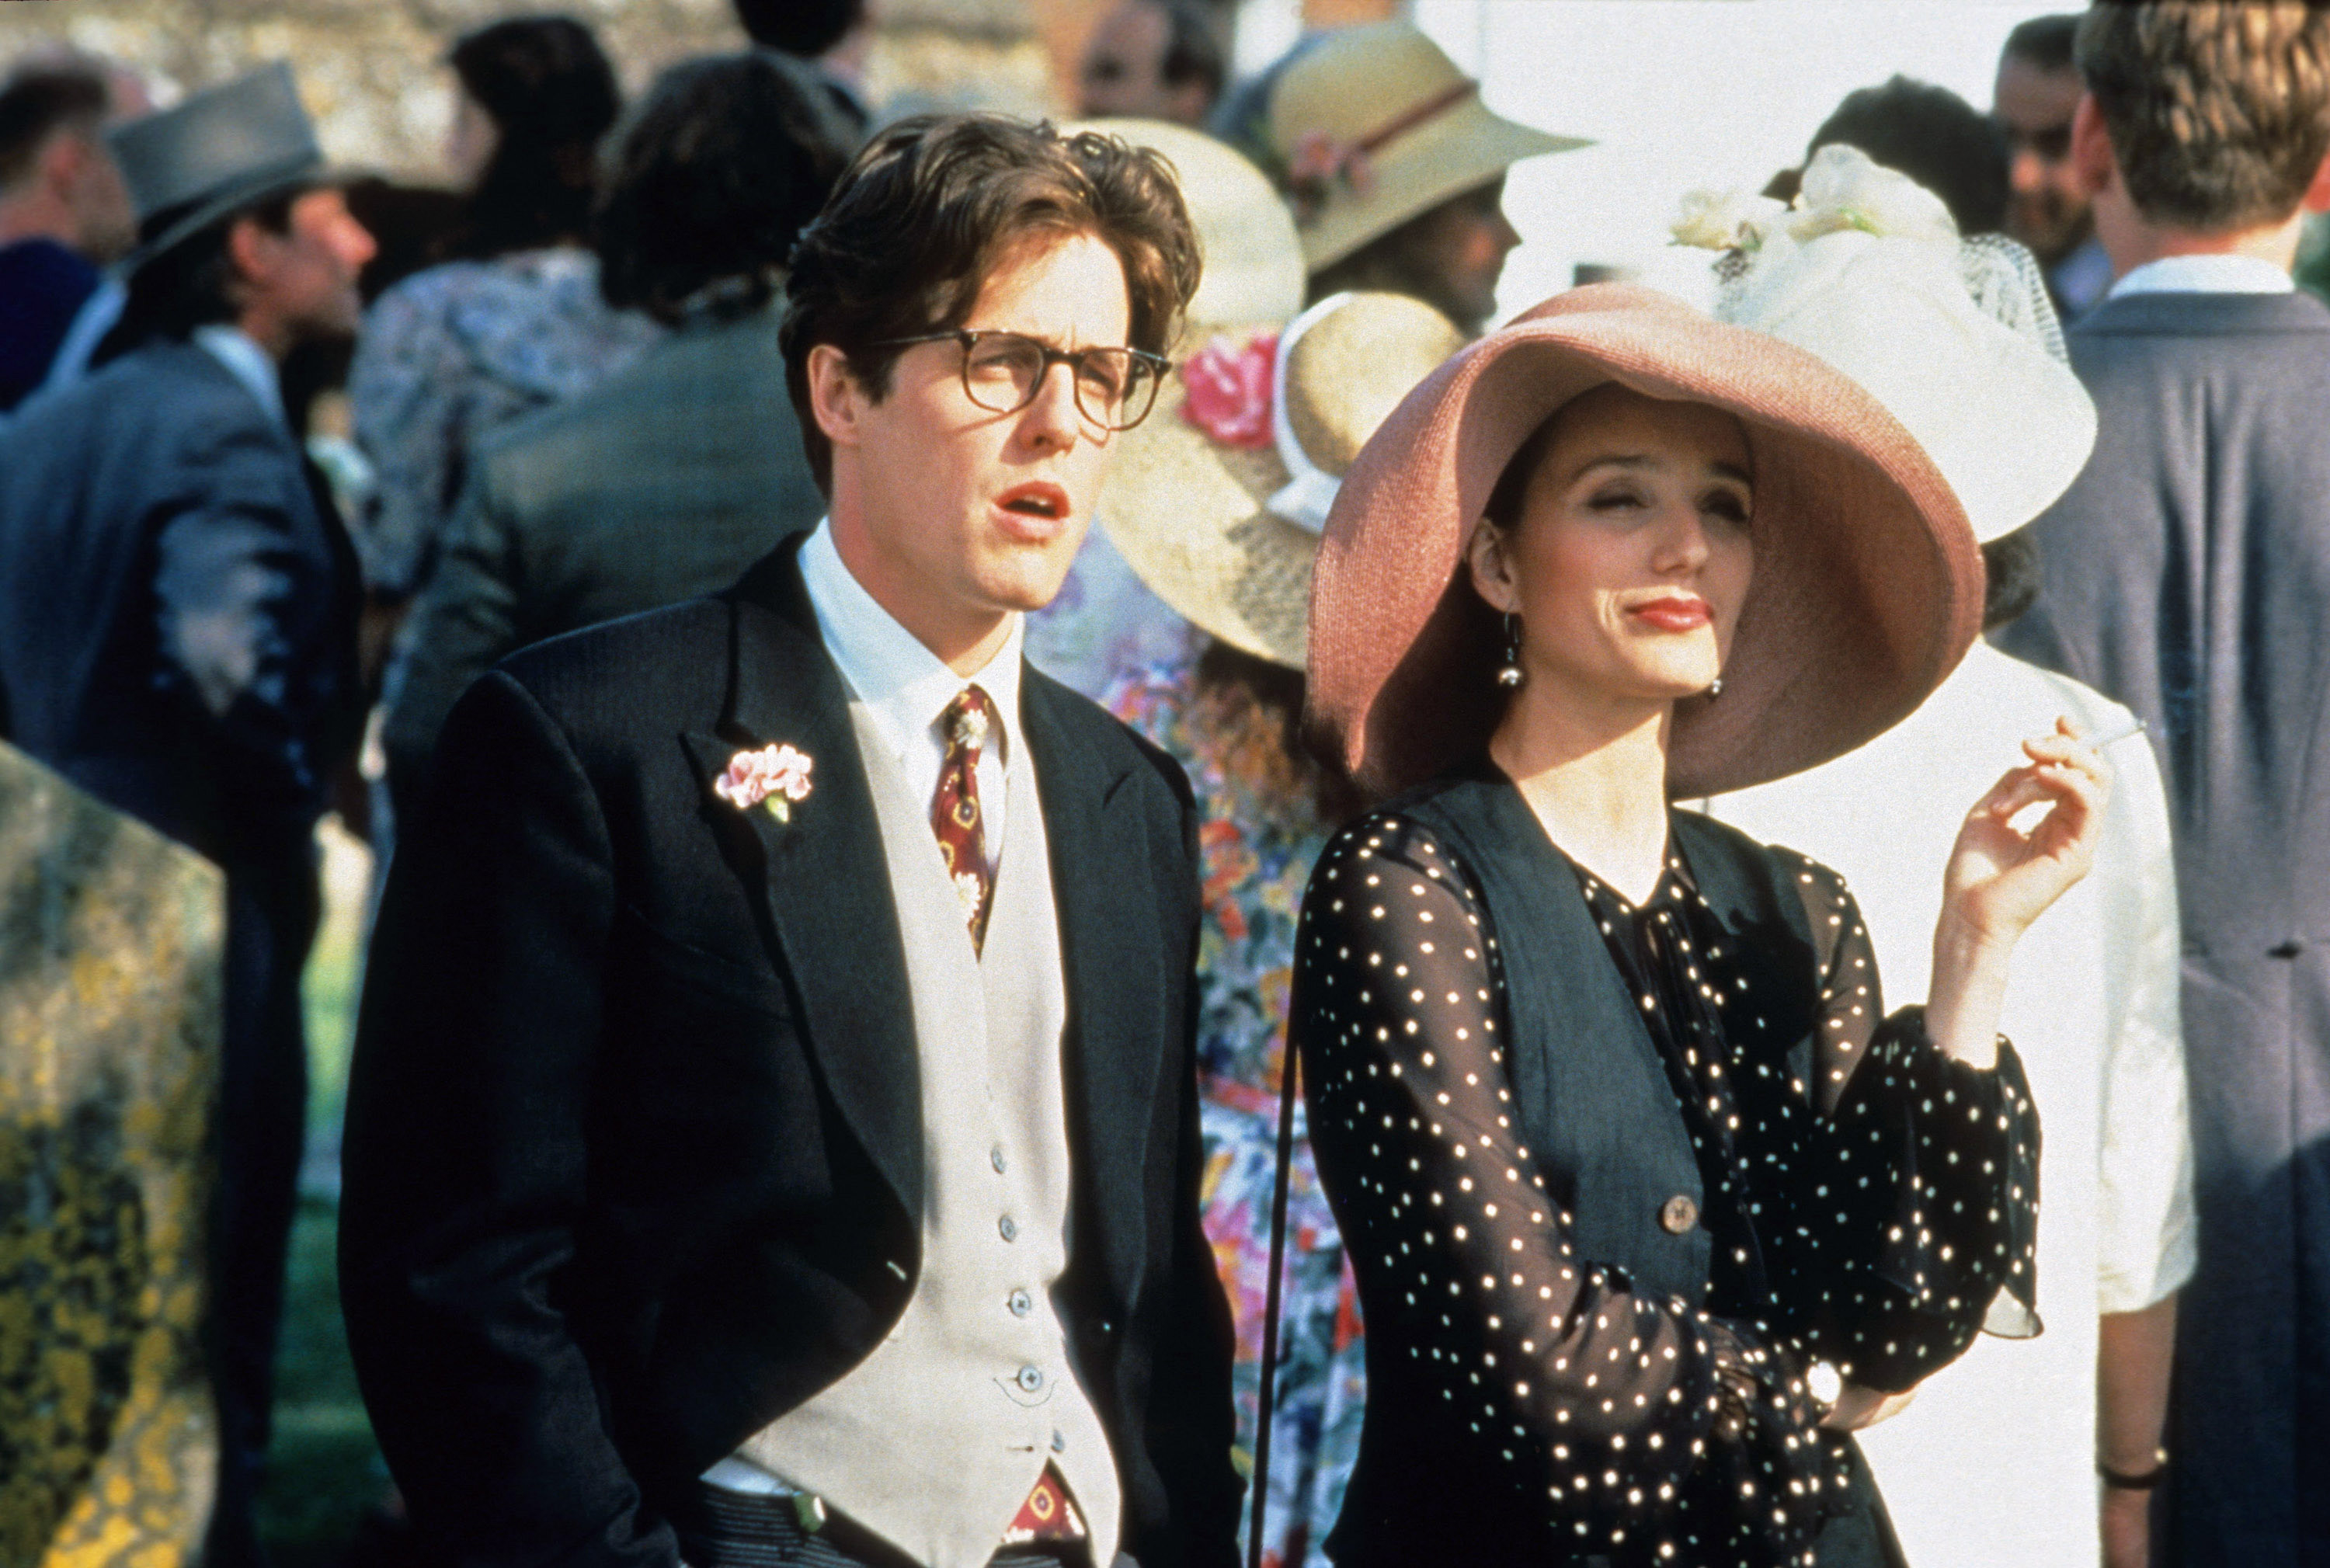 Hugh Grant, Kristin Scott Thomas in 90s wedding guest attire in four weddings and a funeral